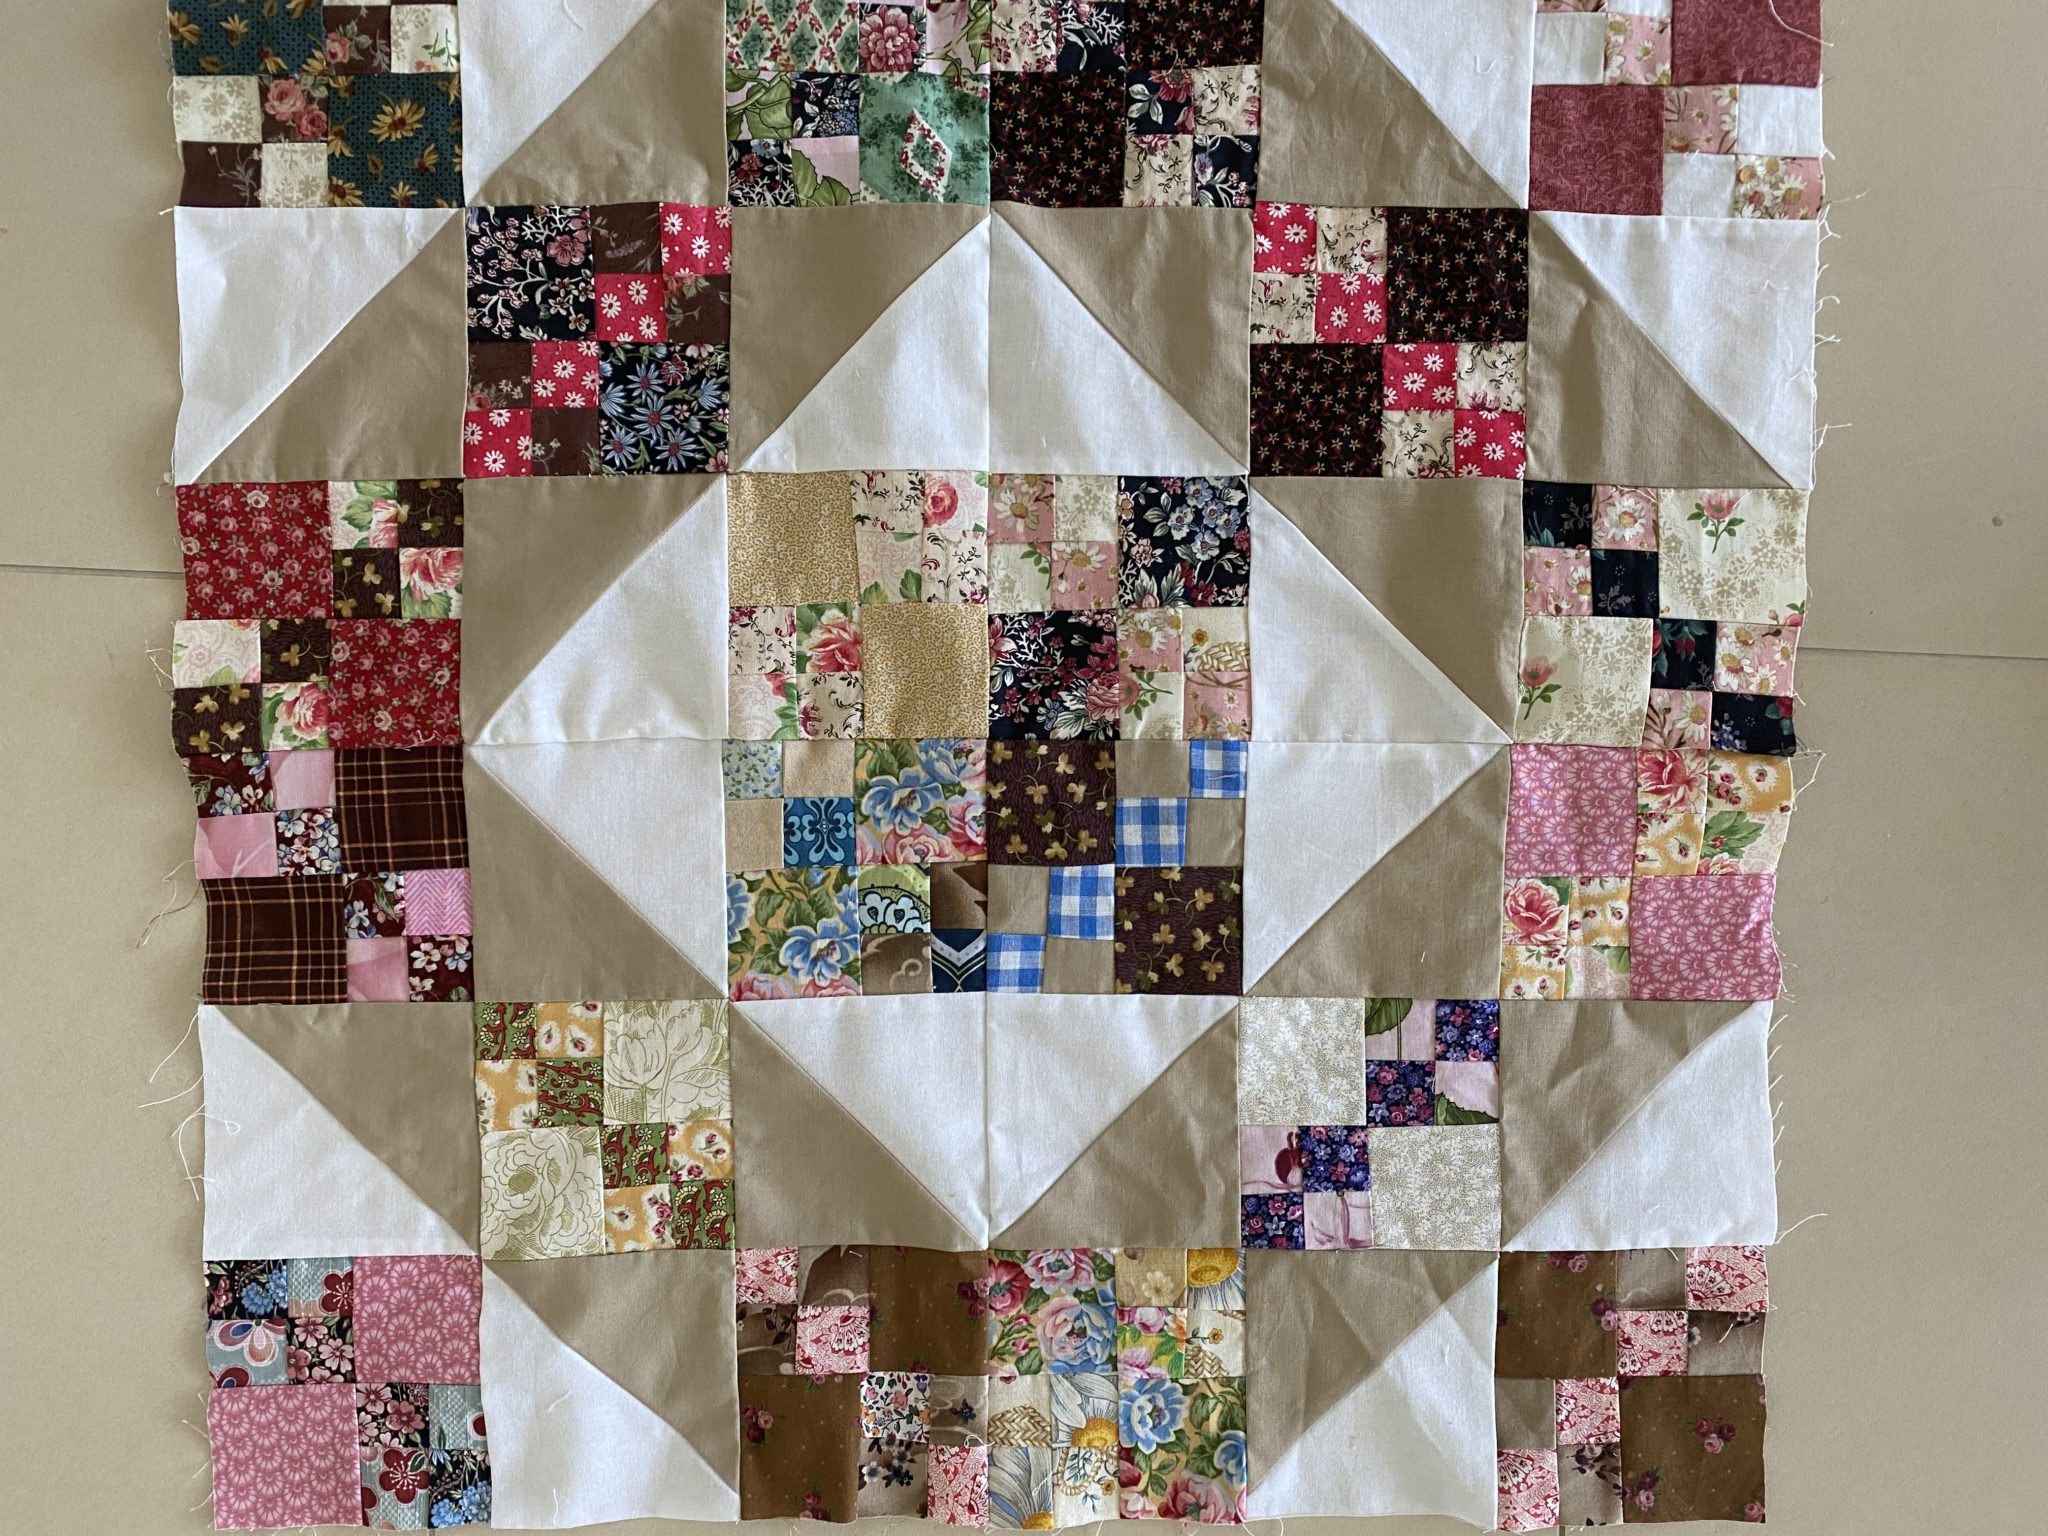 New Scrappy Double Four In Nine Patch Jacobs Ladder Quilt Block Variation - Part 2
susies-scraps.com